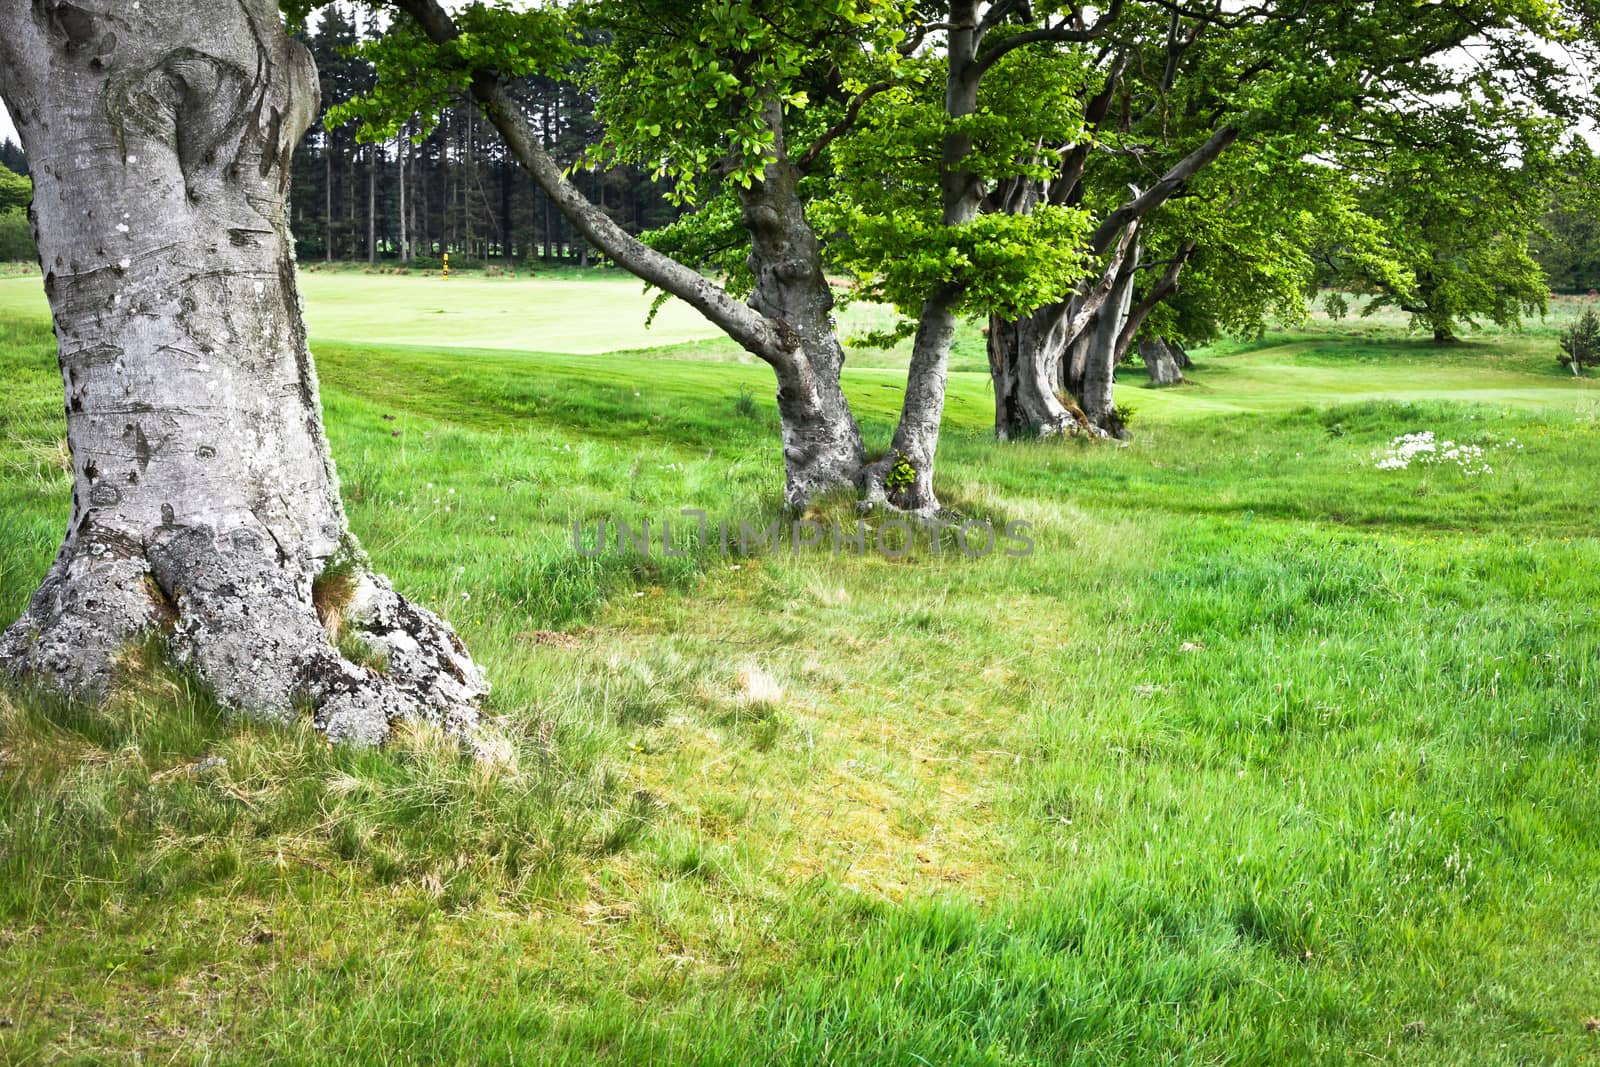 Row of tree trunks in a lush green grass clearing